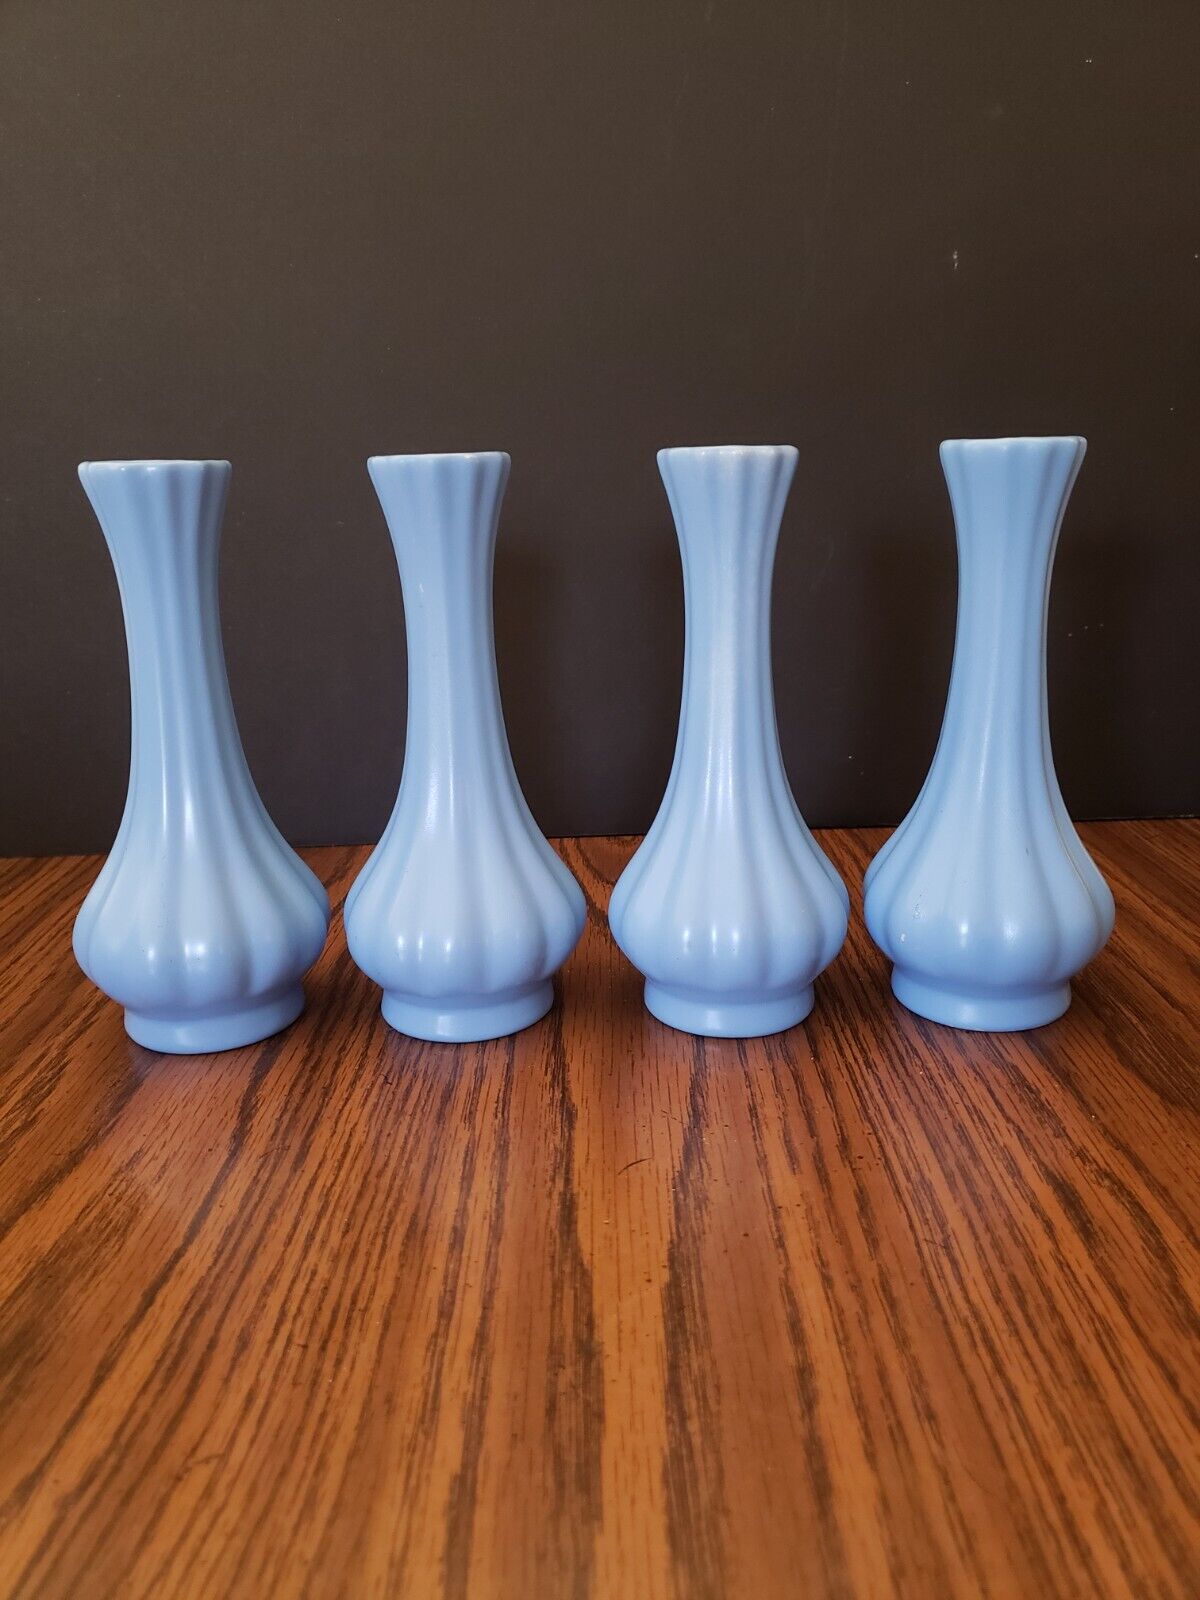 4 Blue.Bud Vases Very nice no chips.